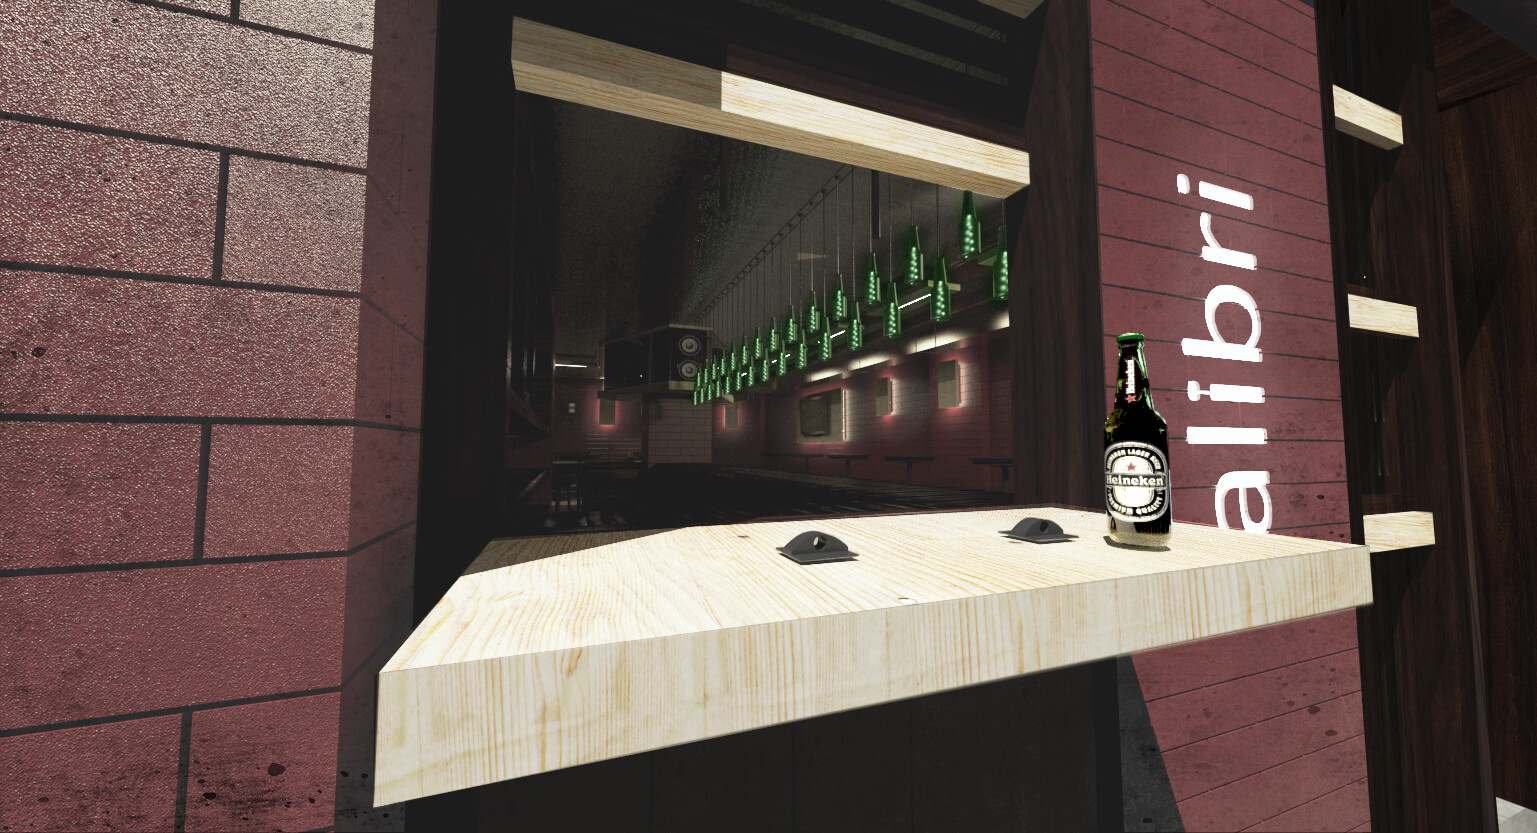 Storefront Bar Rendering showing the architectural design with the Swingable Bar Open